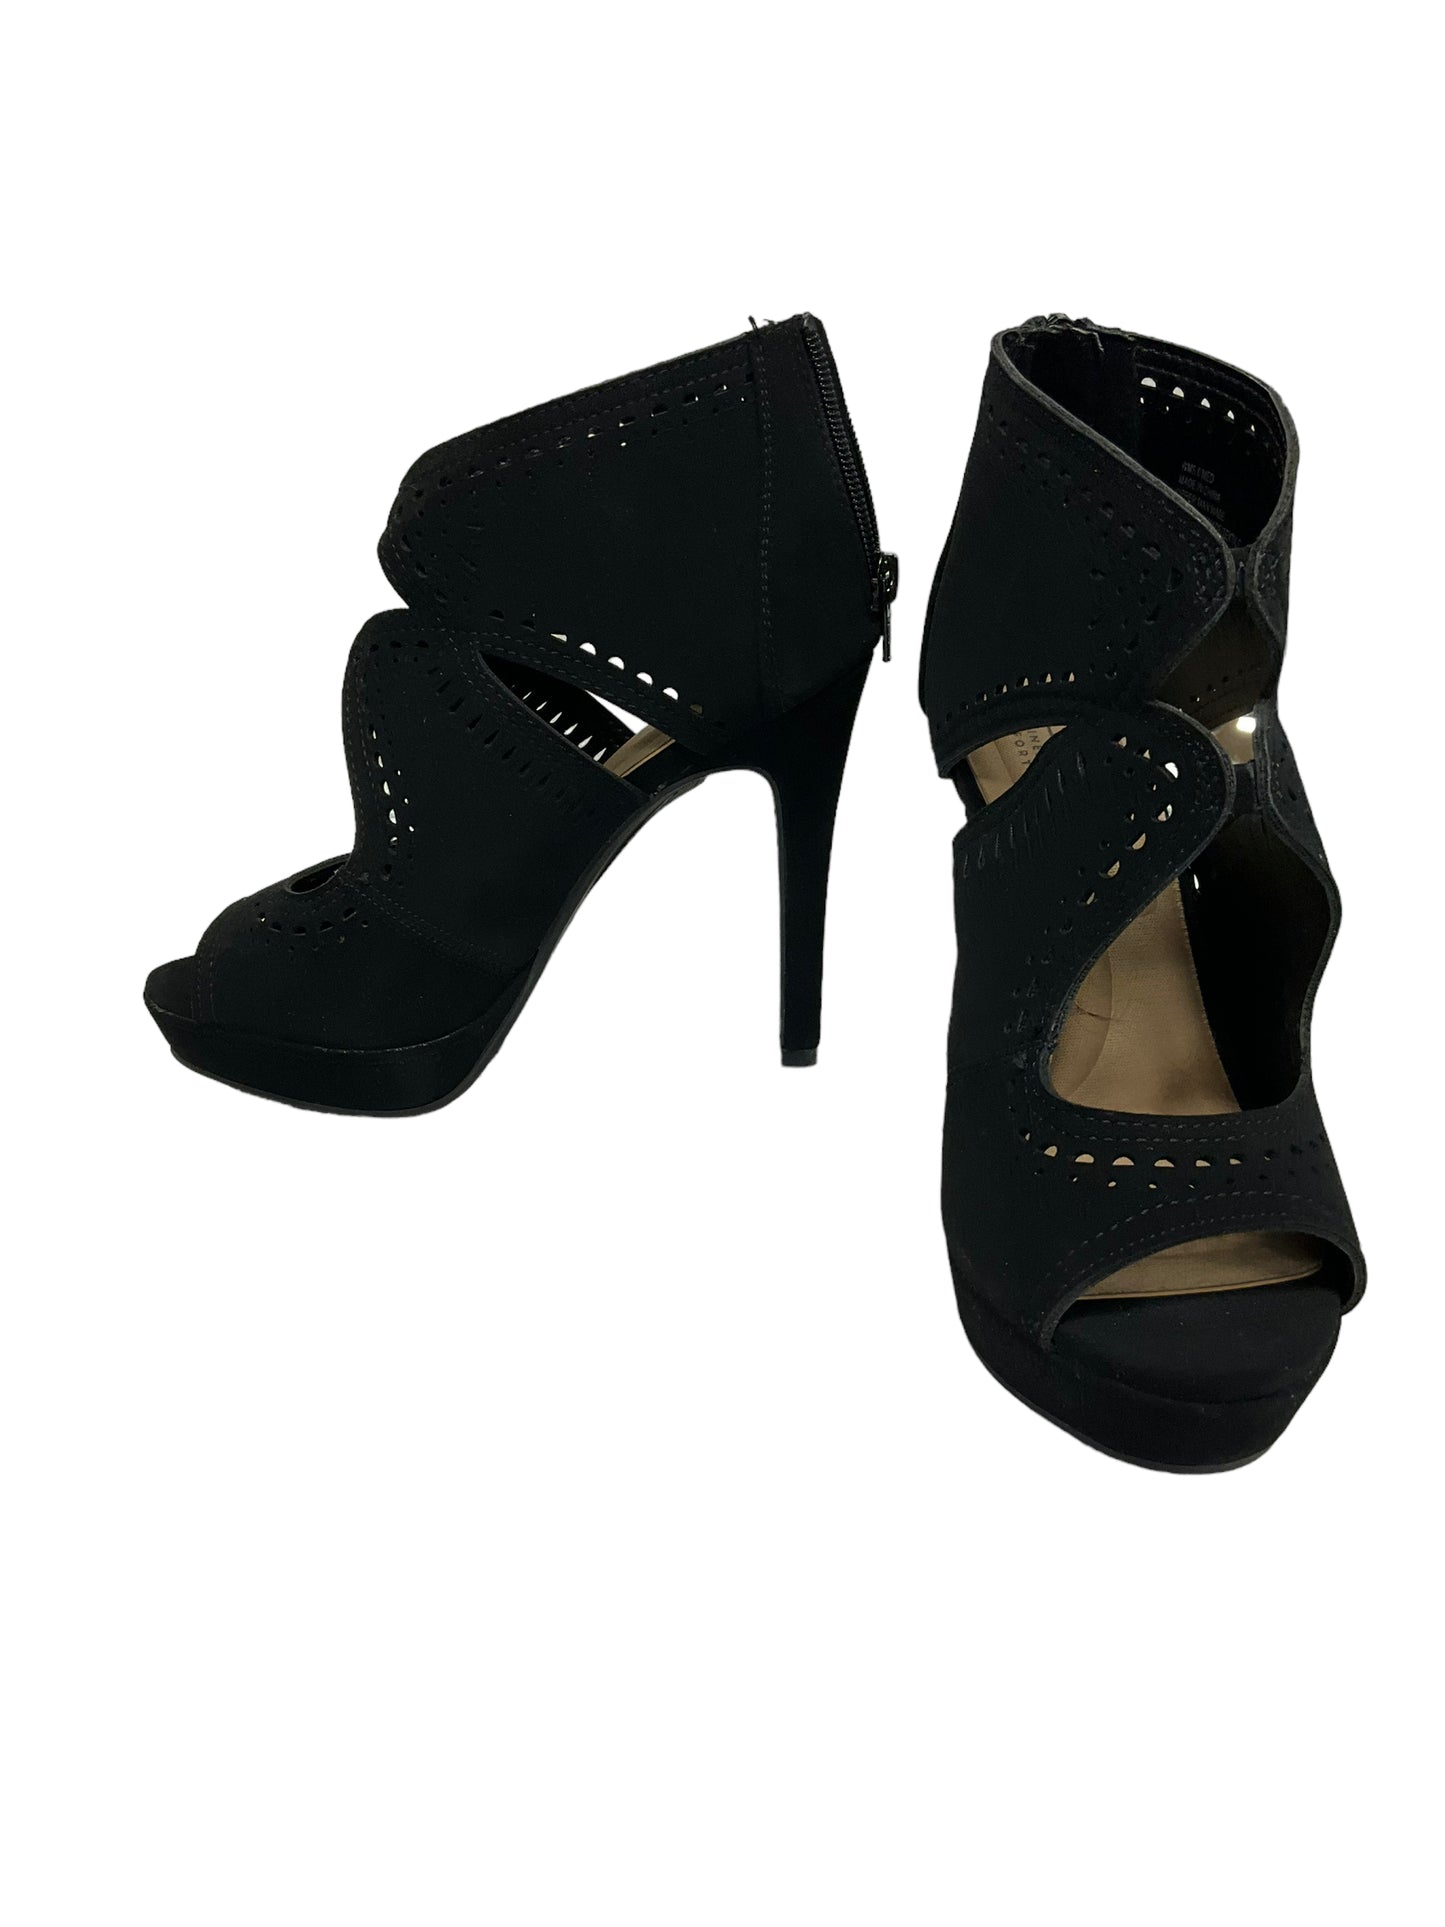 Shoes Heels Stiletto By Apt 9  Size: 6